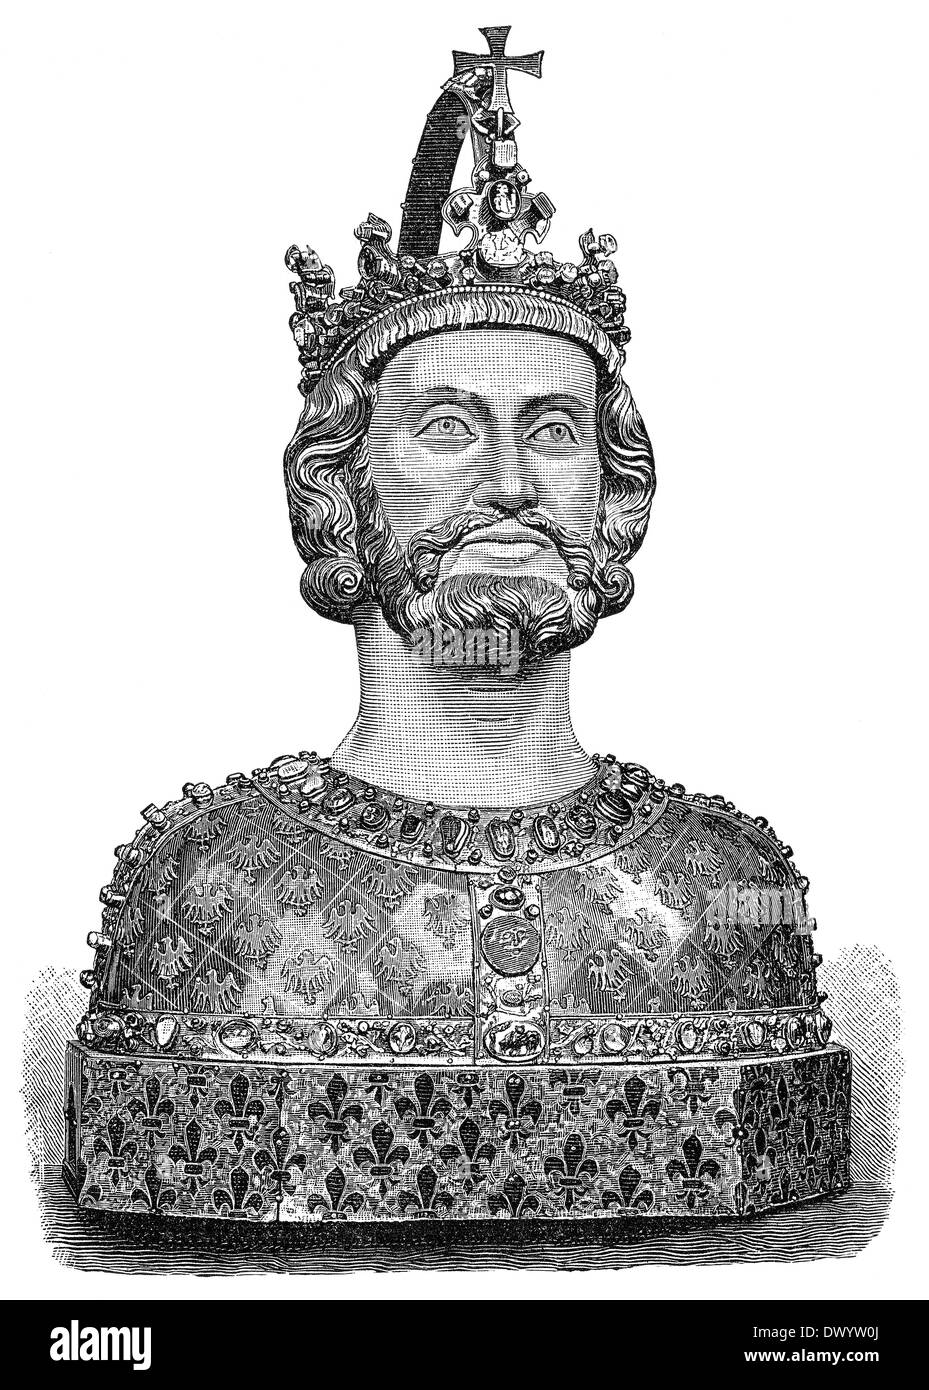 Charlemagne, Charles the Great or Carolus Magnus, 747-814, King of the Franks and Emperor of the Romans, Carolingian dynasty, Stock Photo